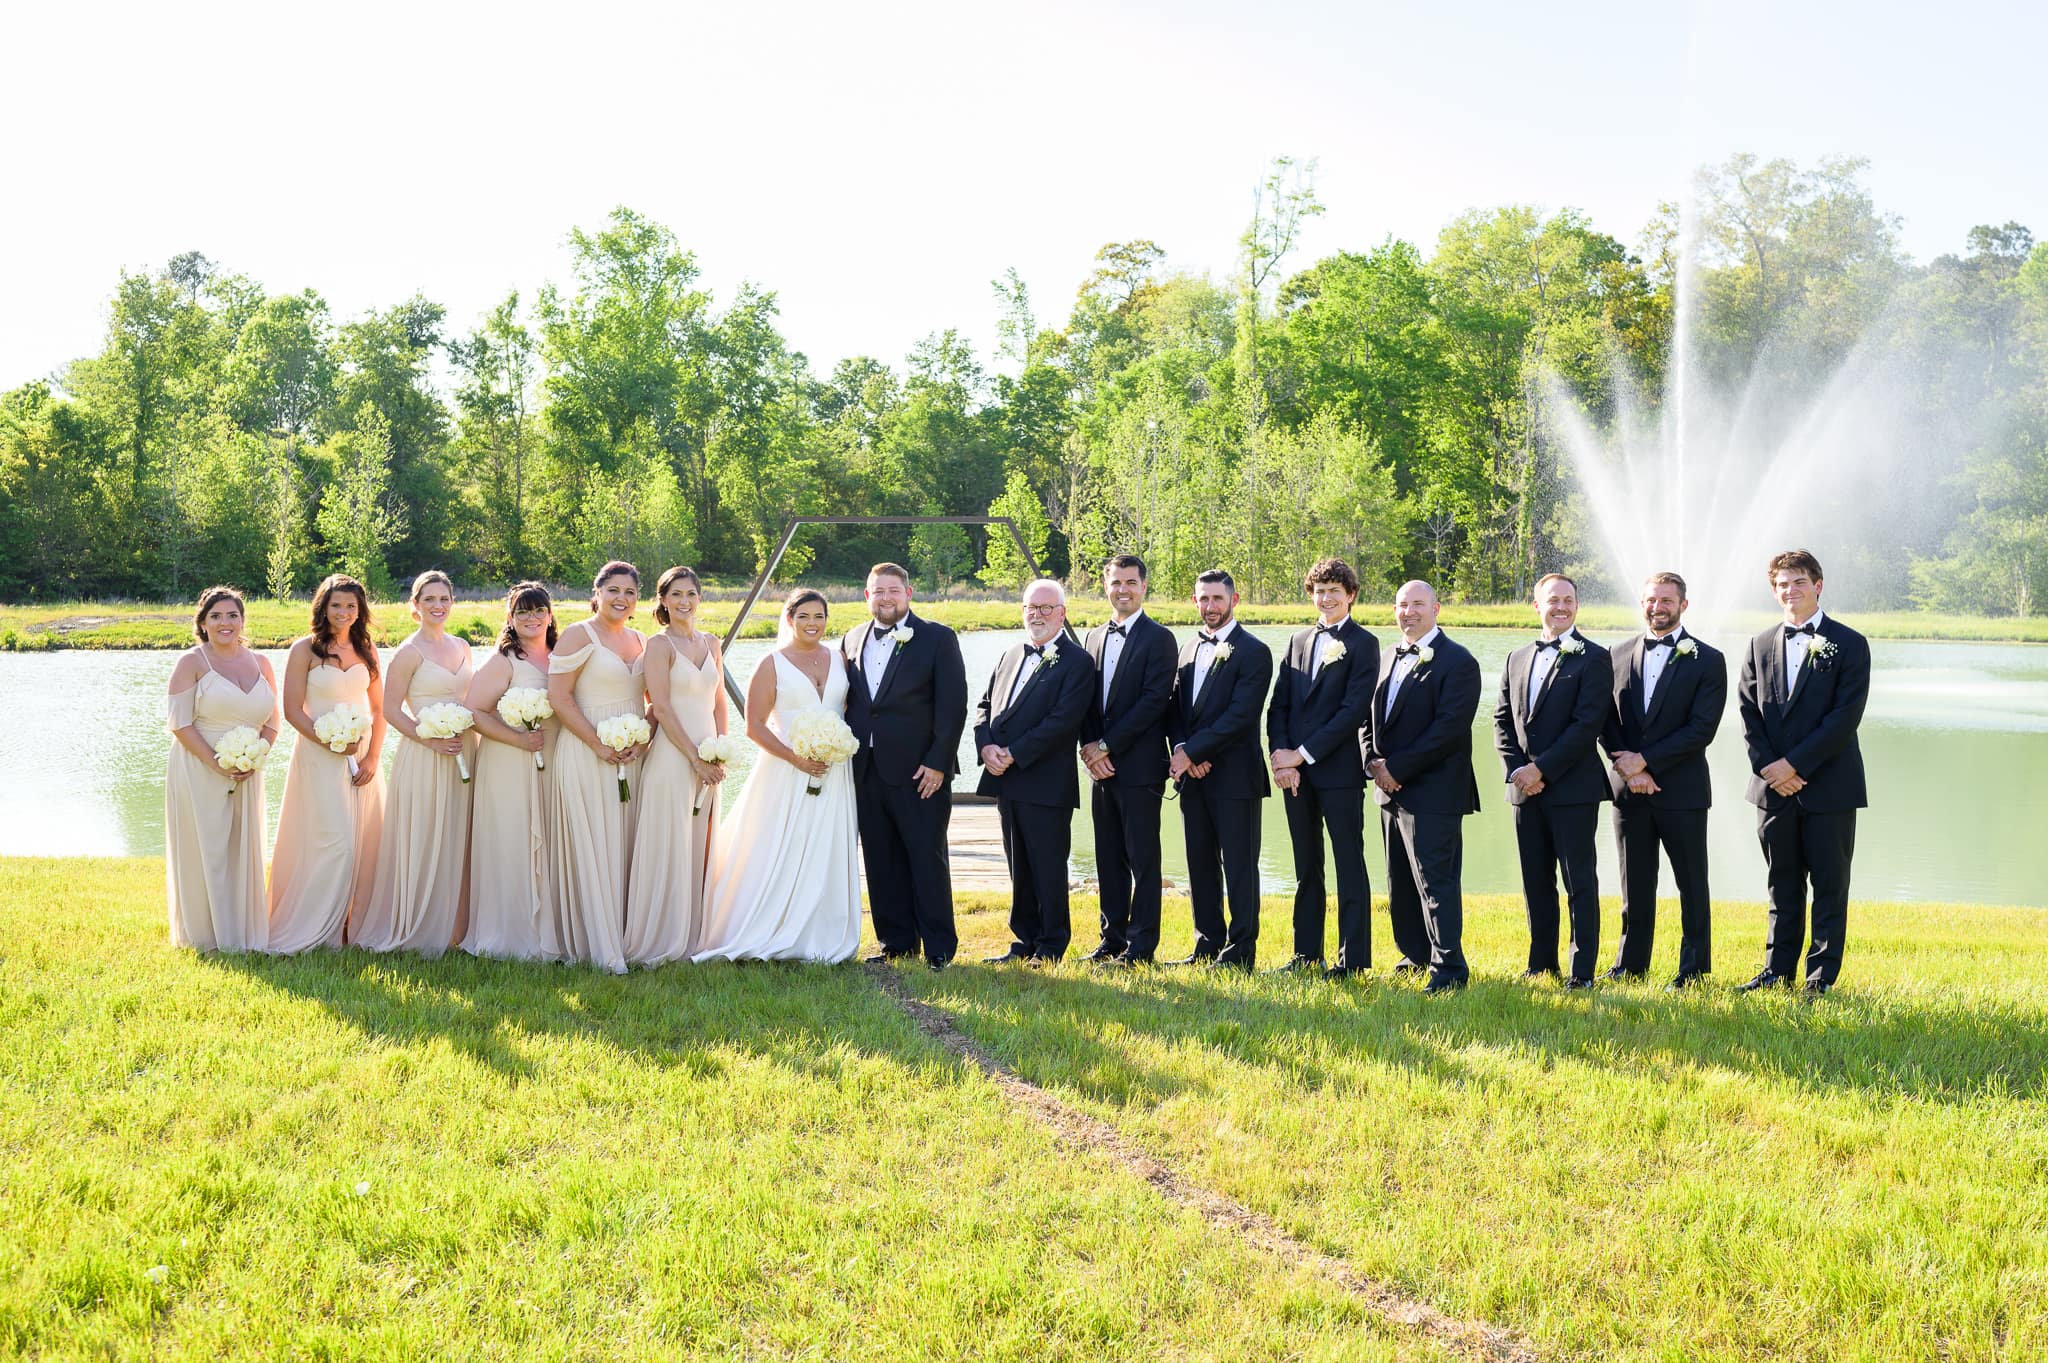 Large bridal party by the lake - The Venue at White Oaks Farm